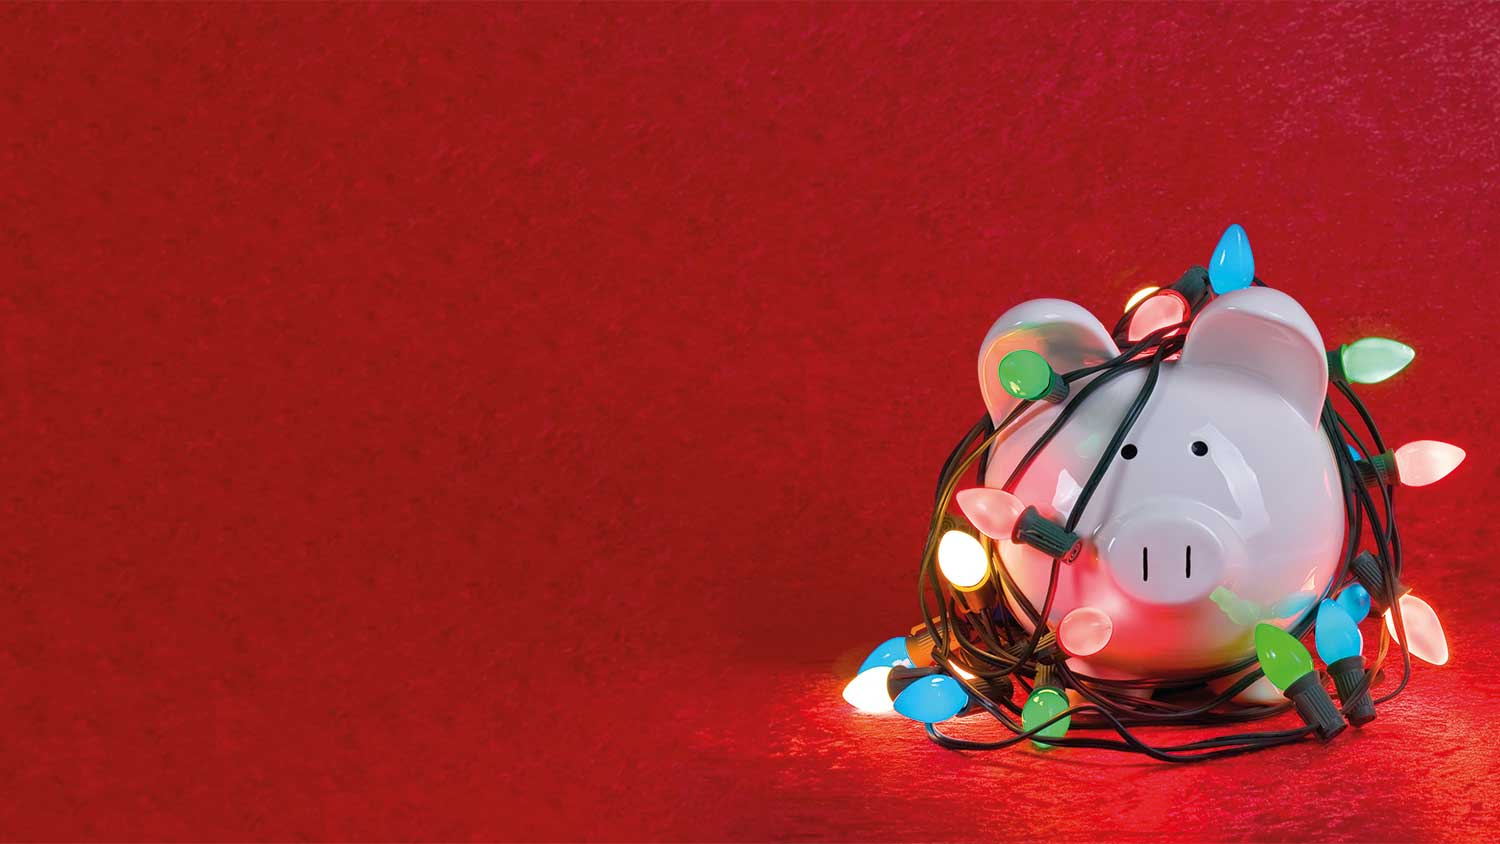 Piggy bank wrapped in Christmas lights